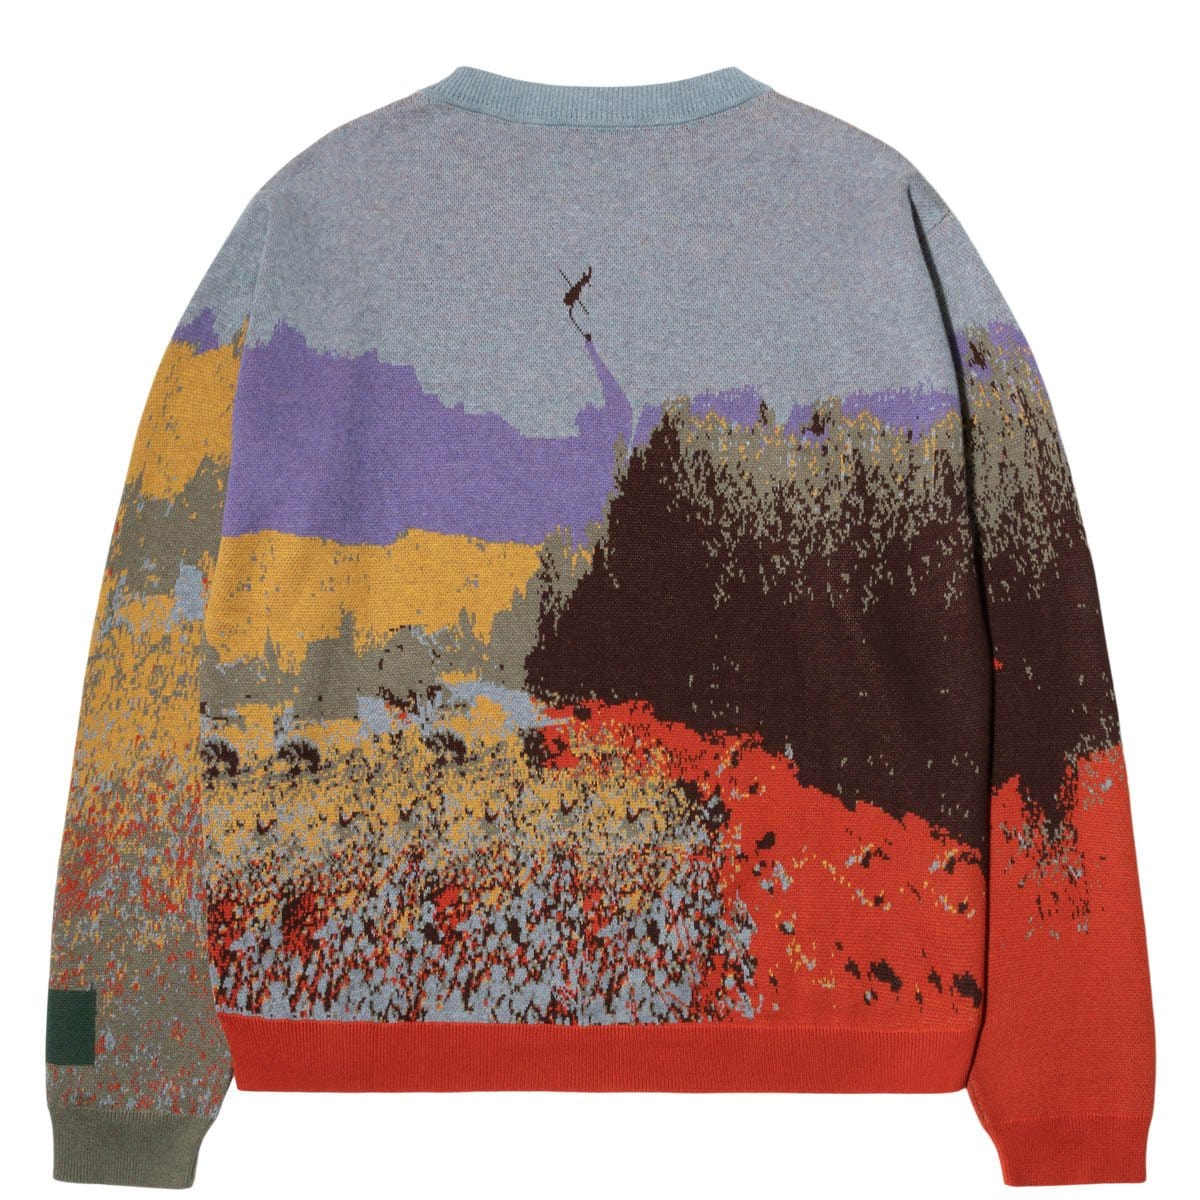 Reese Cooper Knitwear WESTERN WILDFIRES JACQUARD KNIT SWEATER